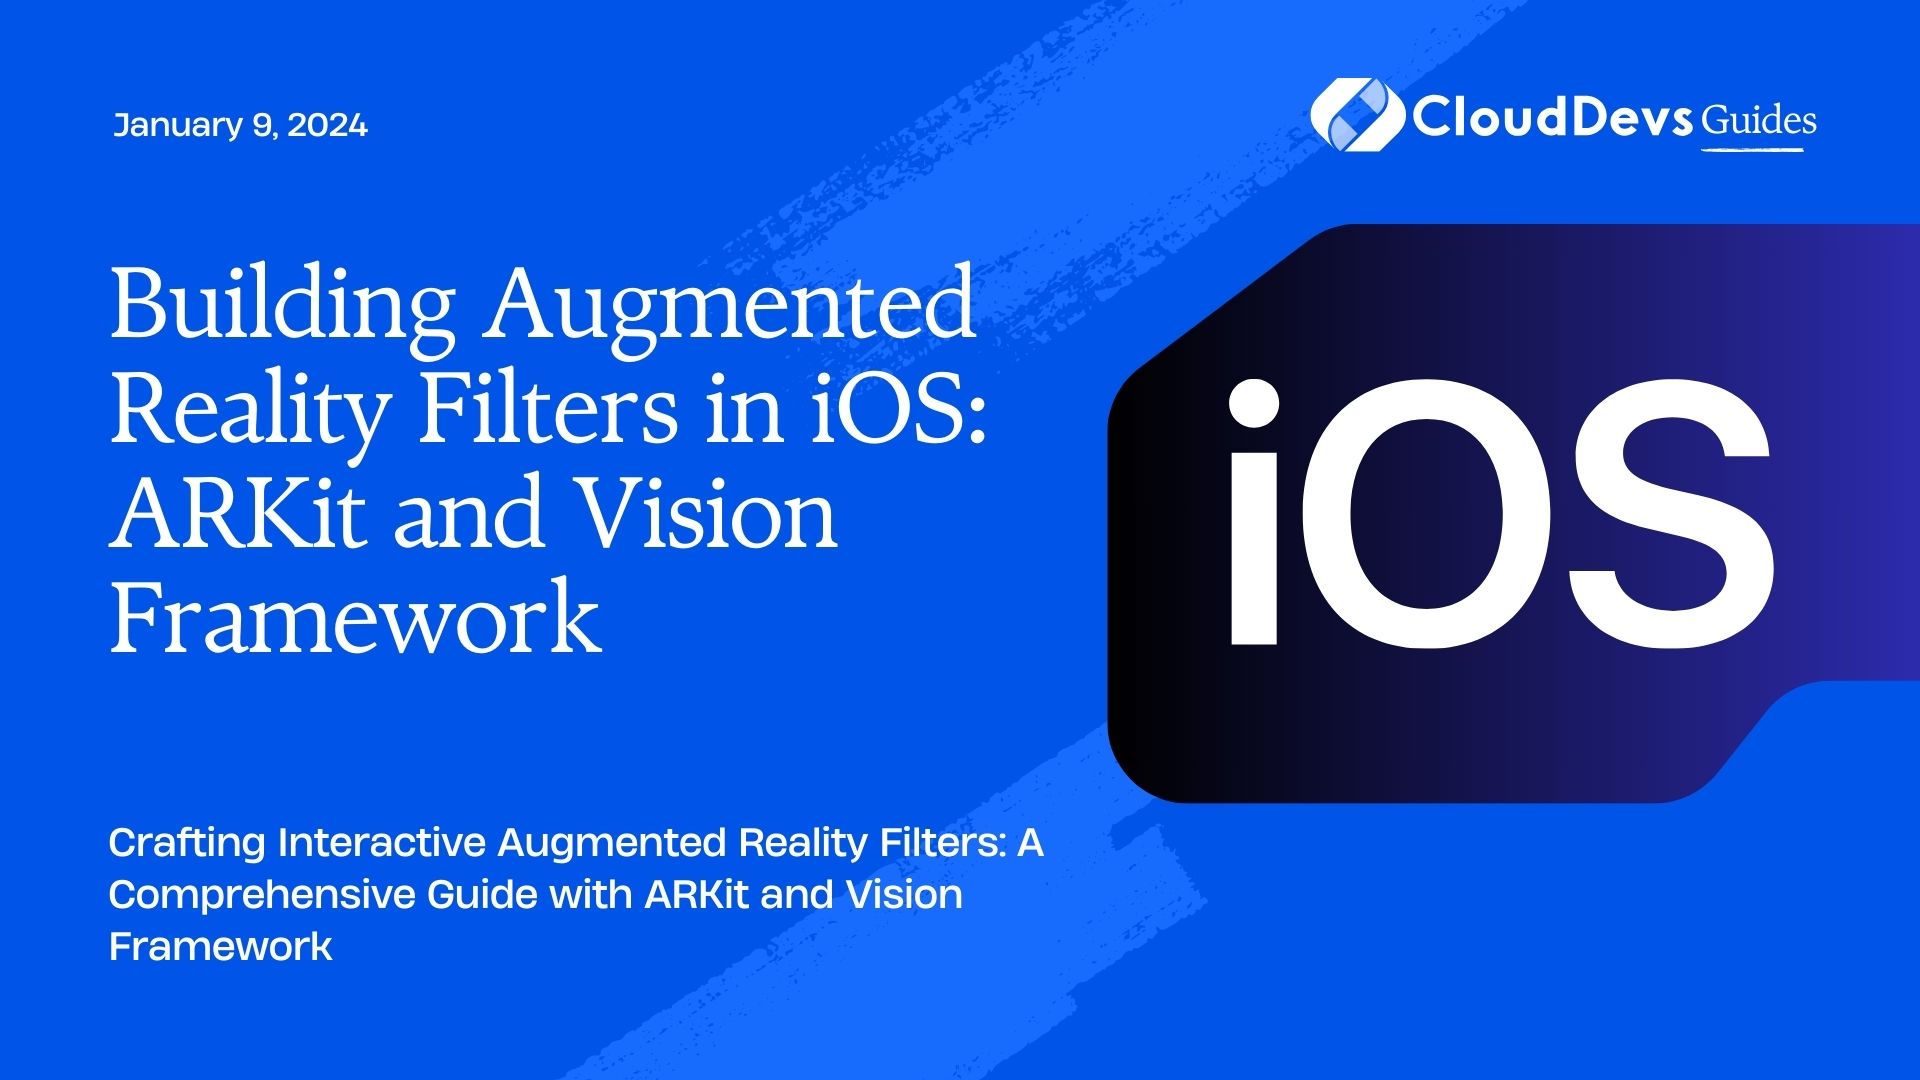 Building Augmented Reality Filters in iOS: ARKit and Vision Framework